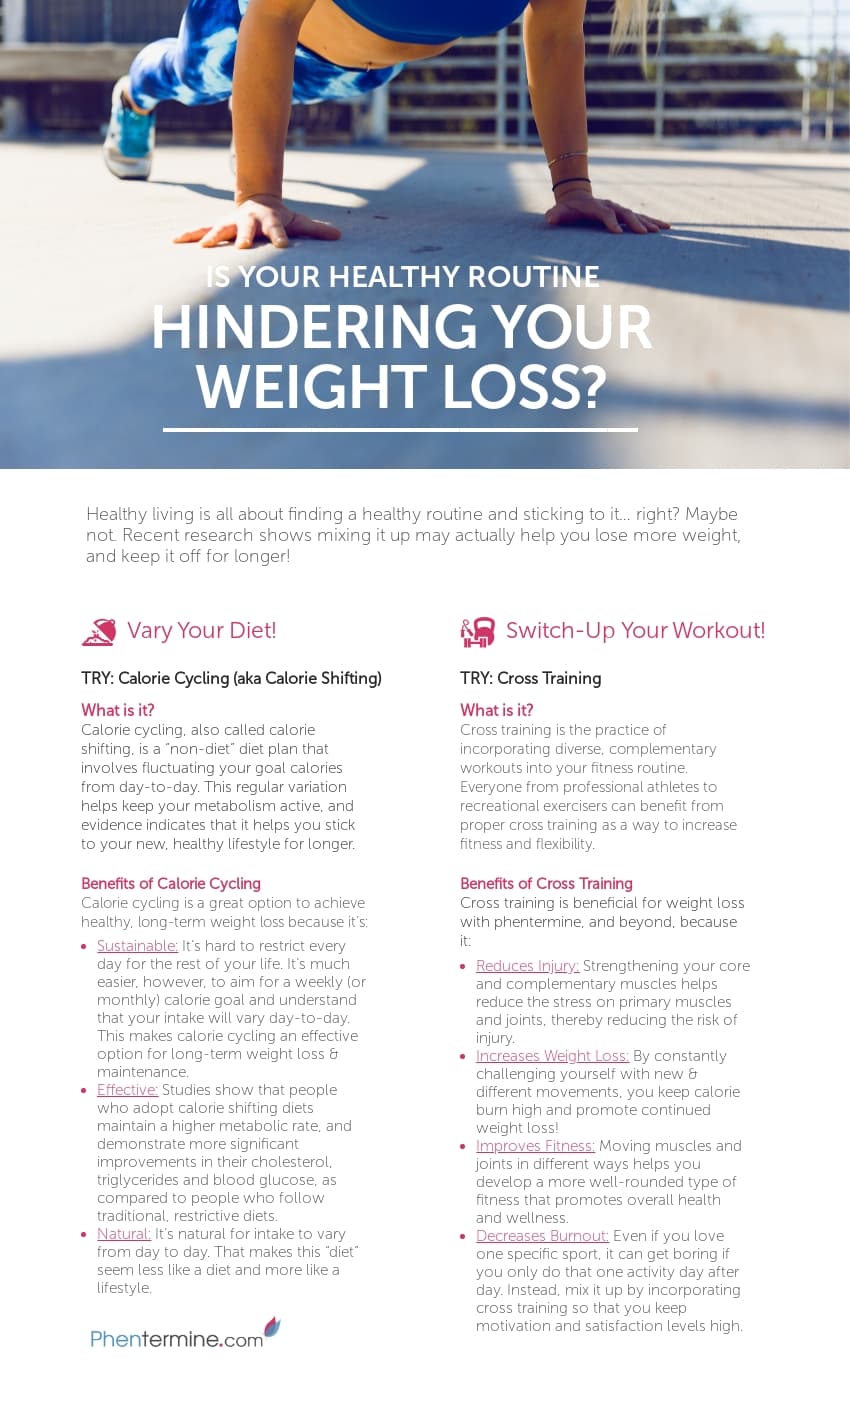 infographic on calorie cycling, cross training and weight loss